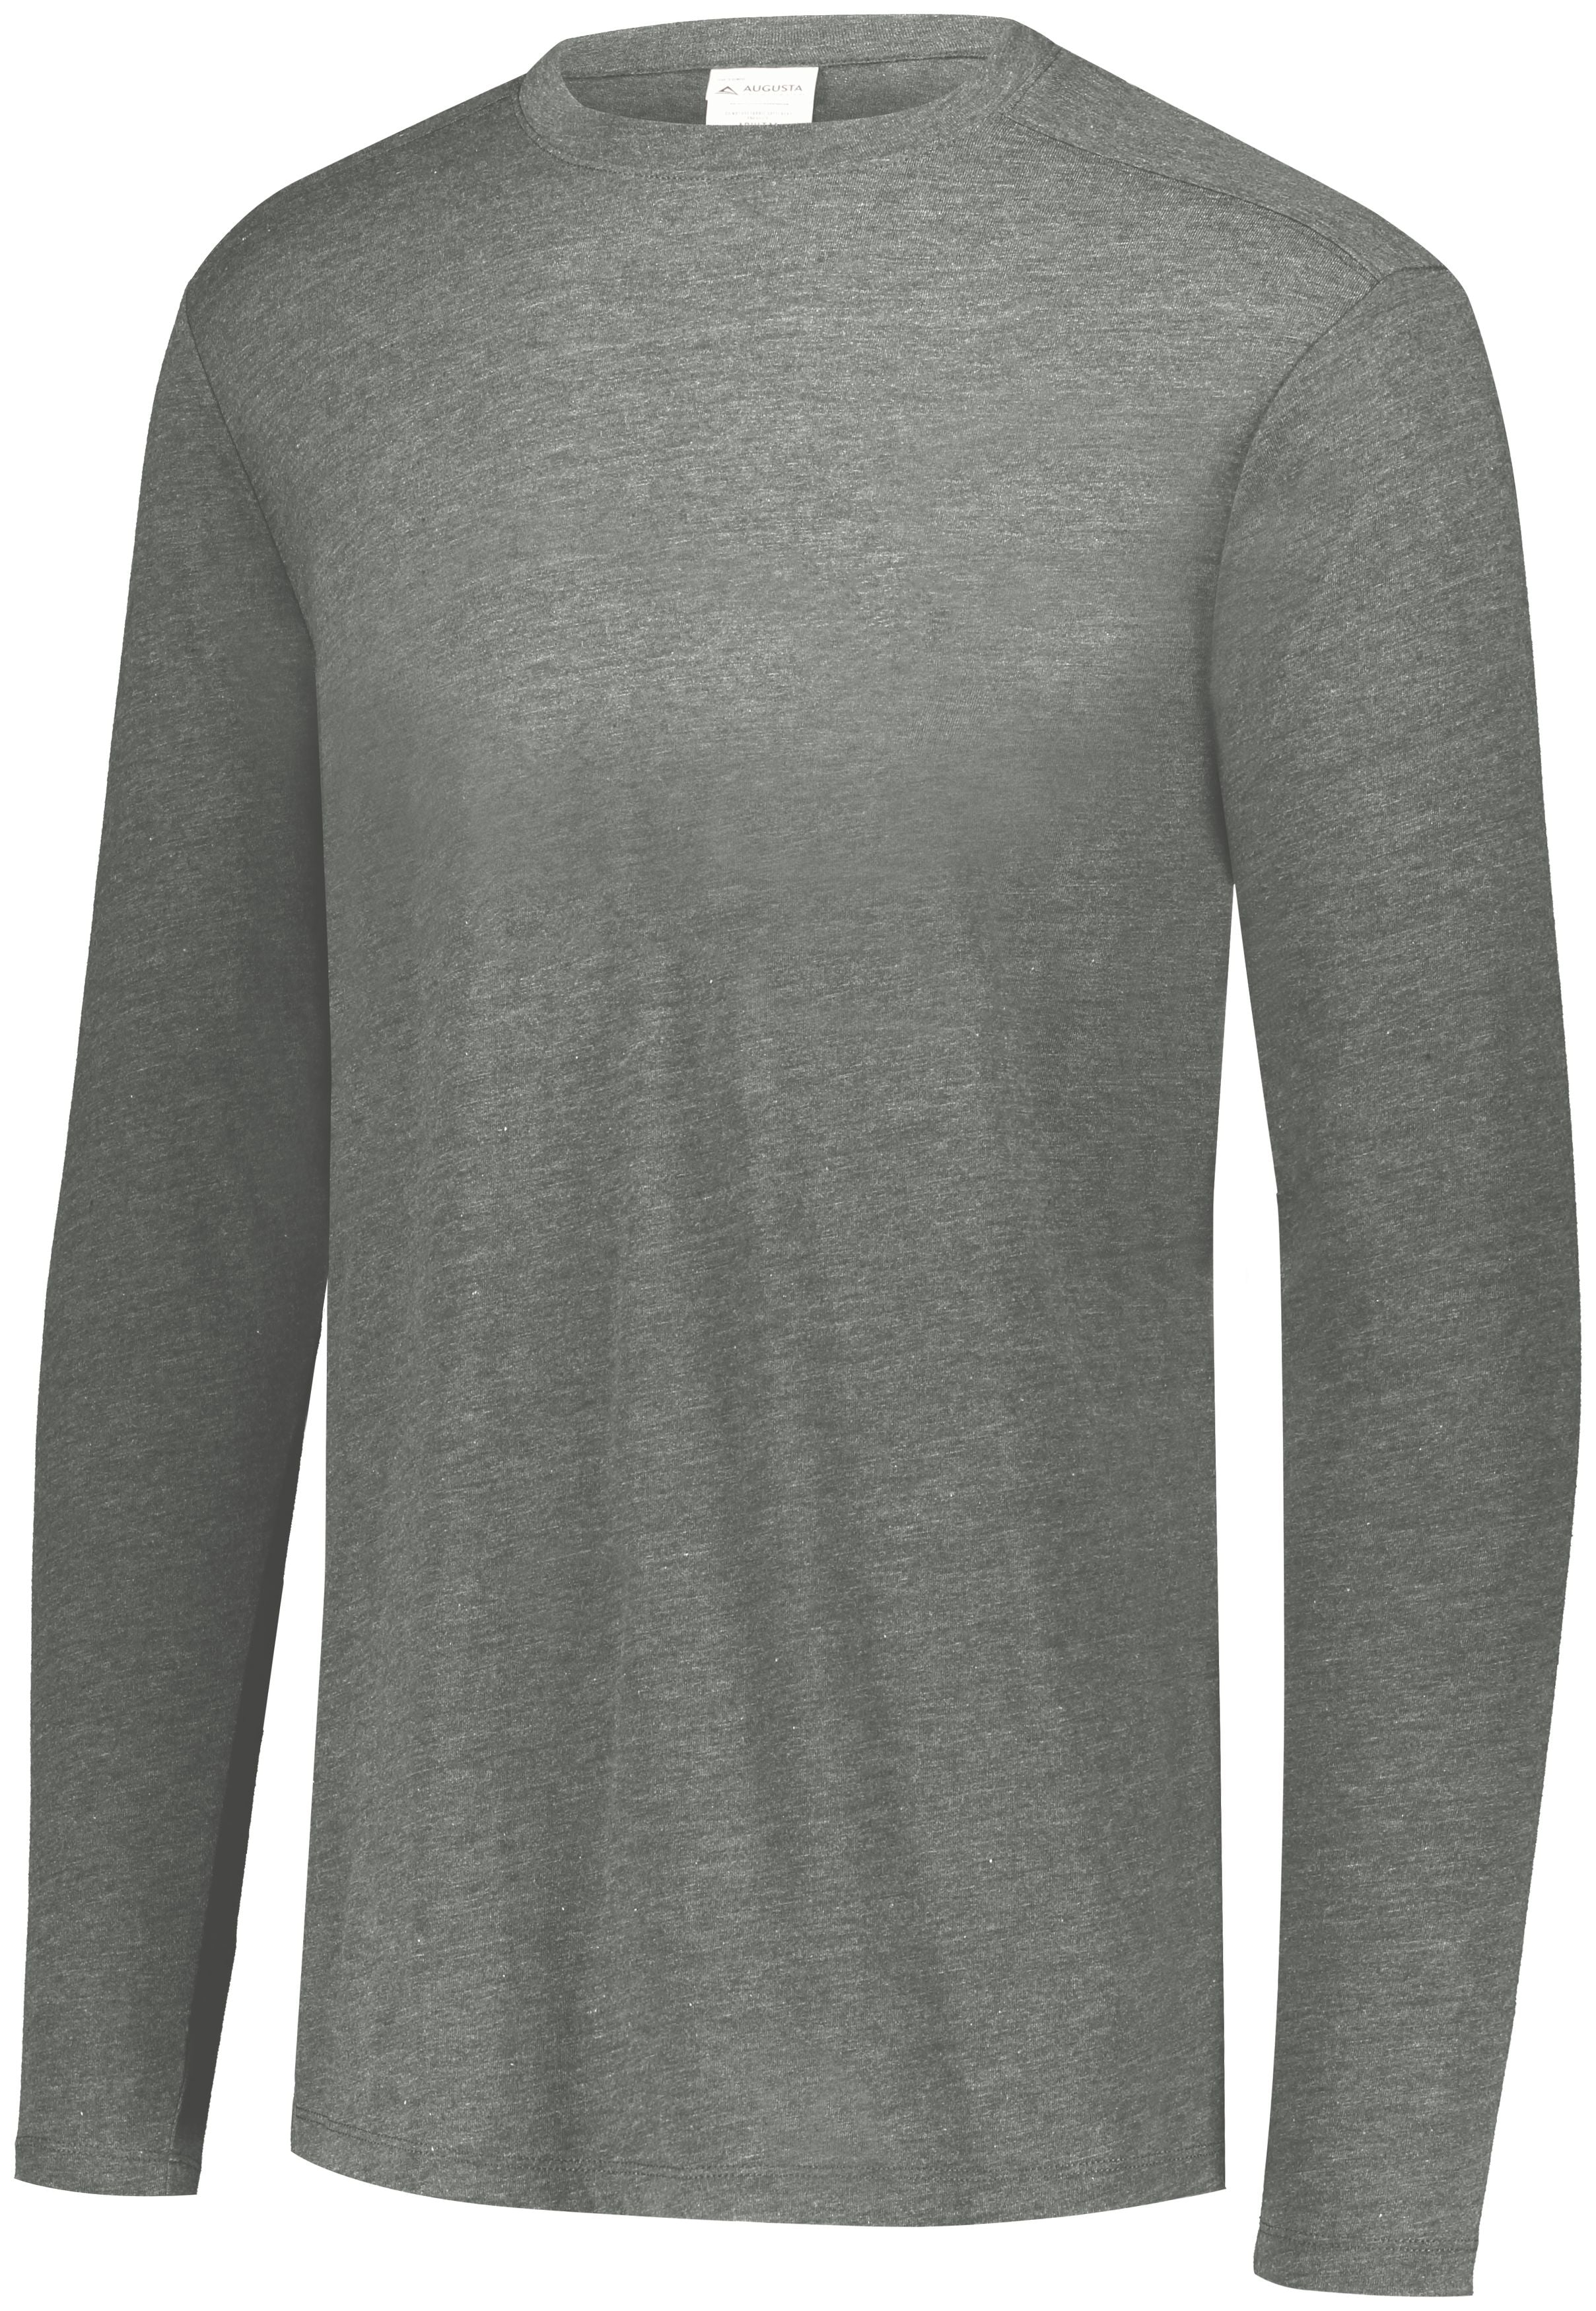 Augusta Sportswear Tri-Blend Long Sleeve Crew in Grey Heather  -Part of the Adult, Augusta-Products, Shirts product lines at KanaleyCreations.com